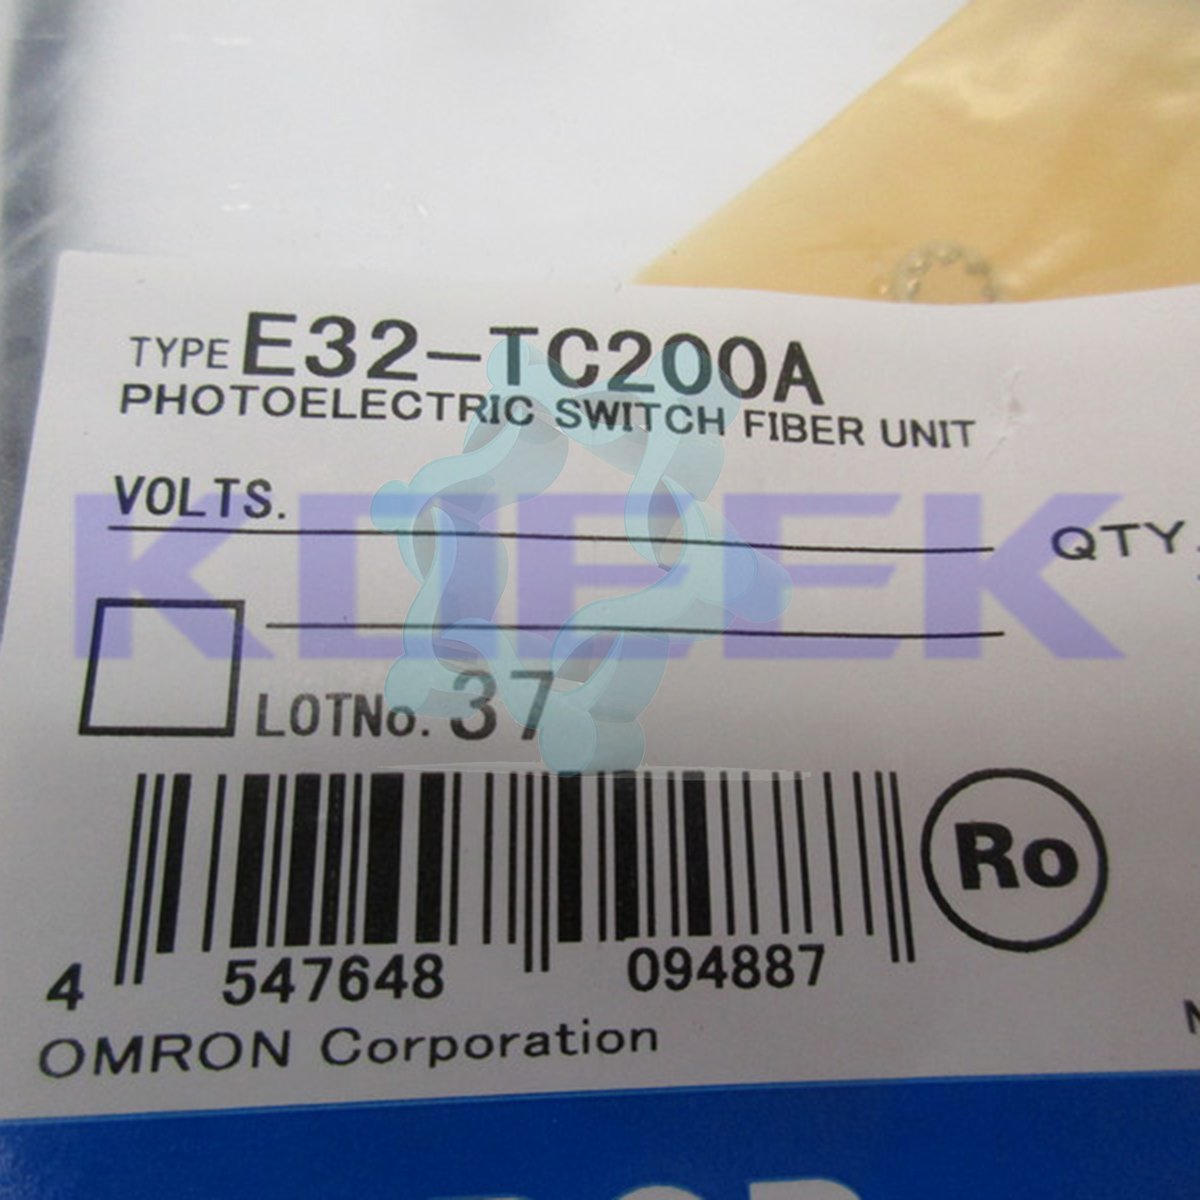 E32-TC200A KOEED 101-200, 80%, import_2020_10_10_031751, Omron, Other